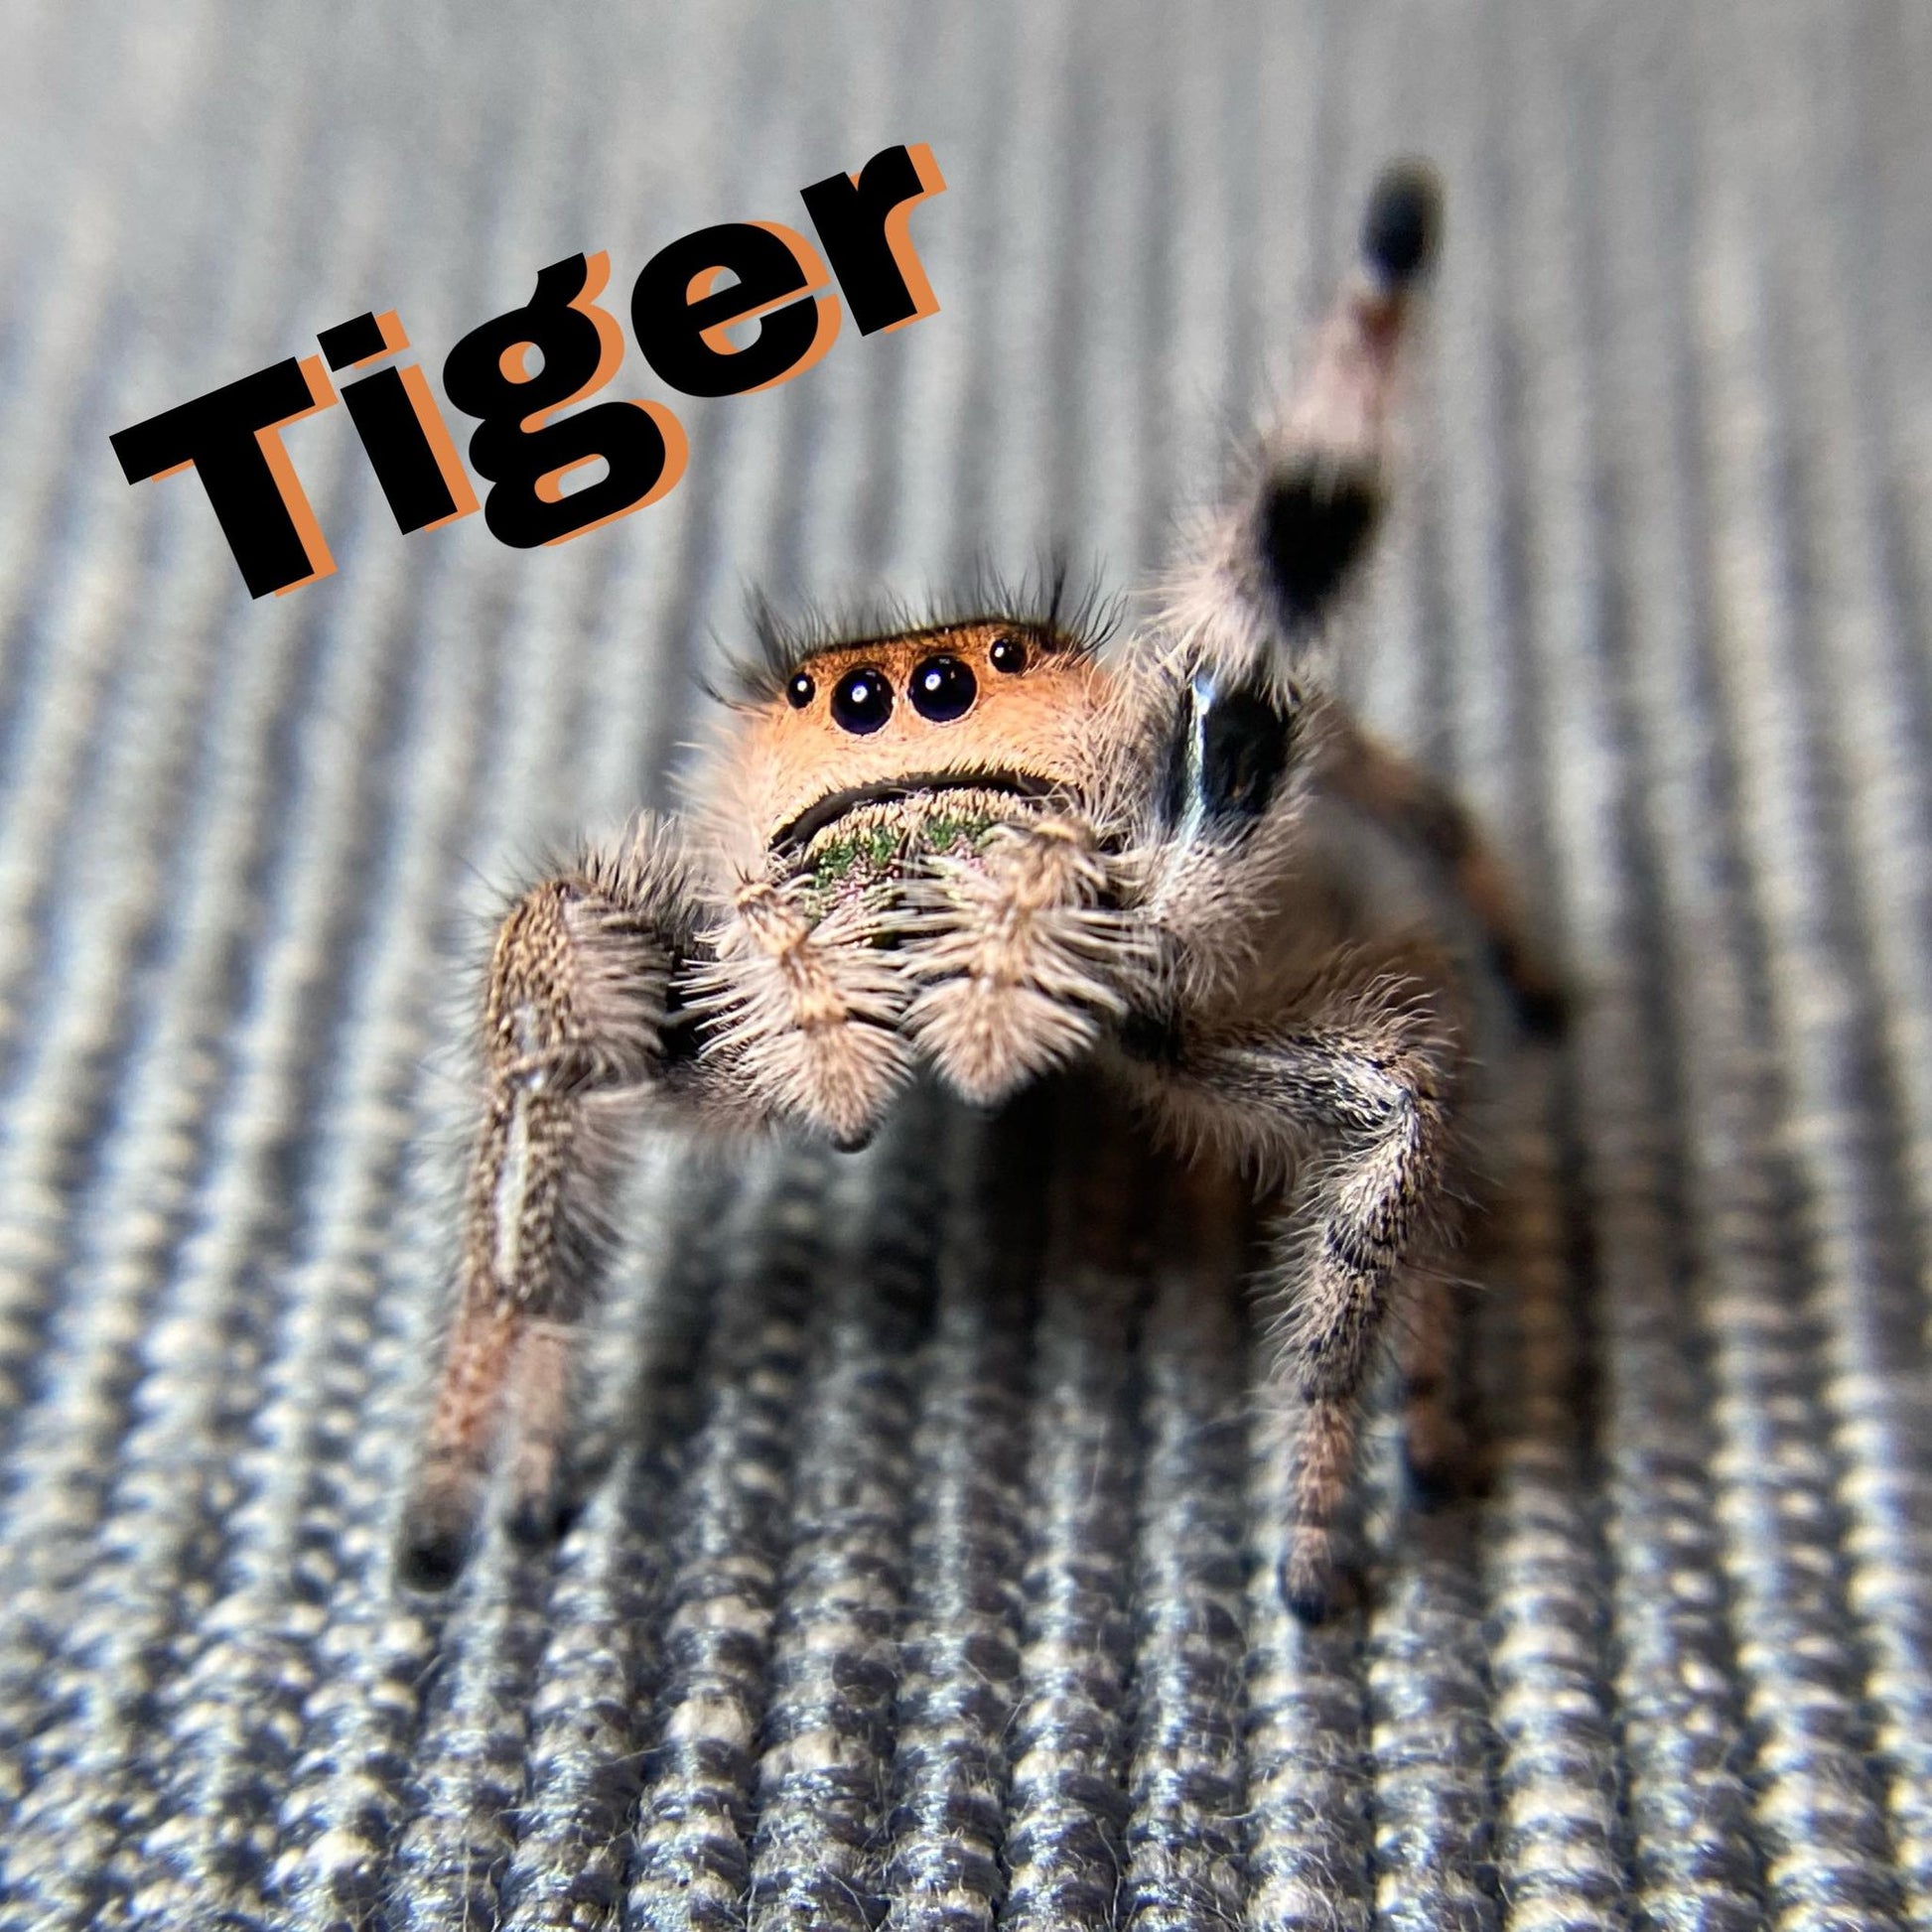 Regal Jumping Spiders